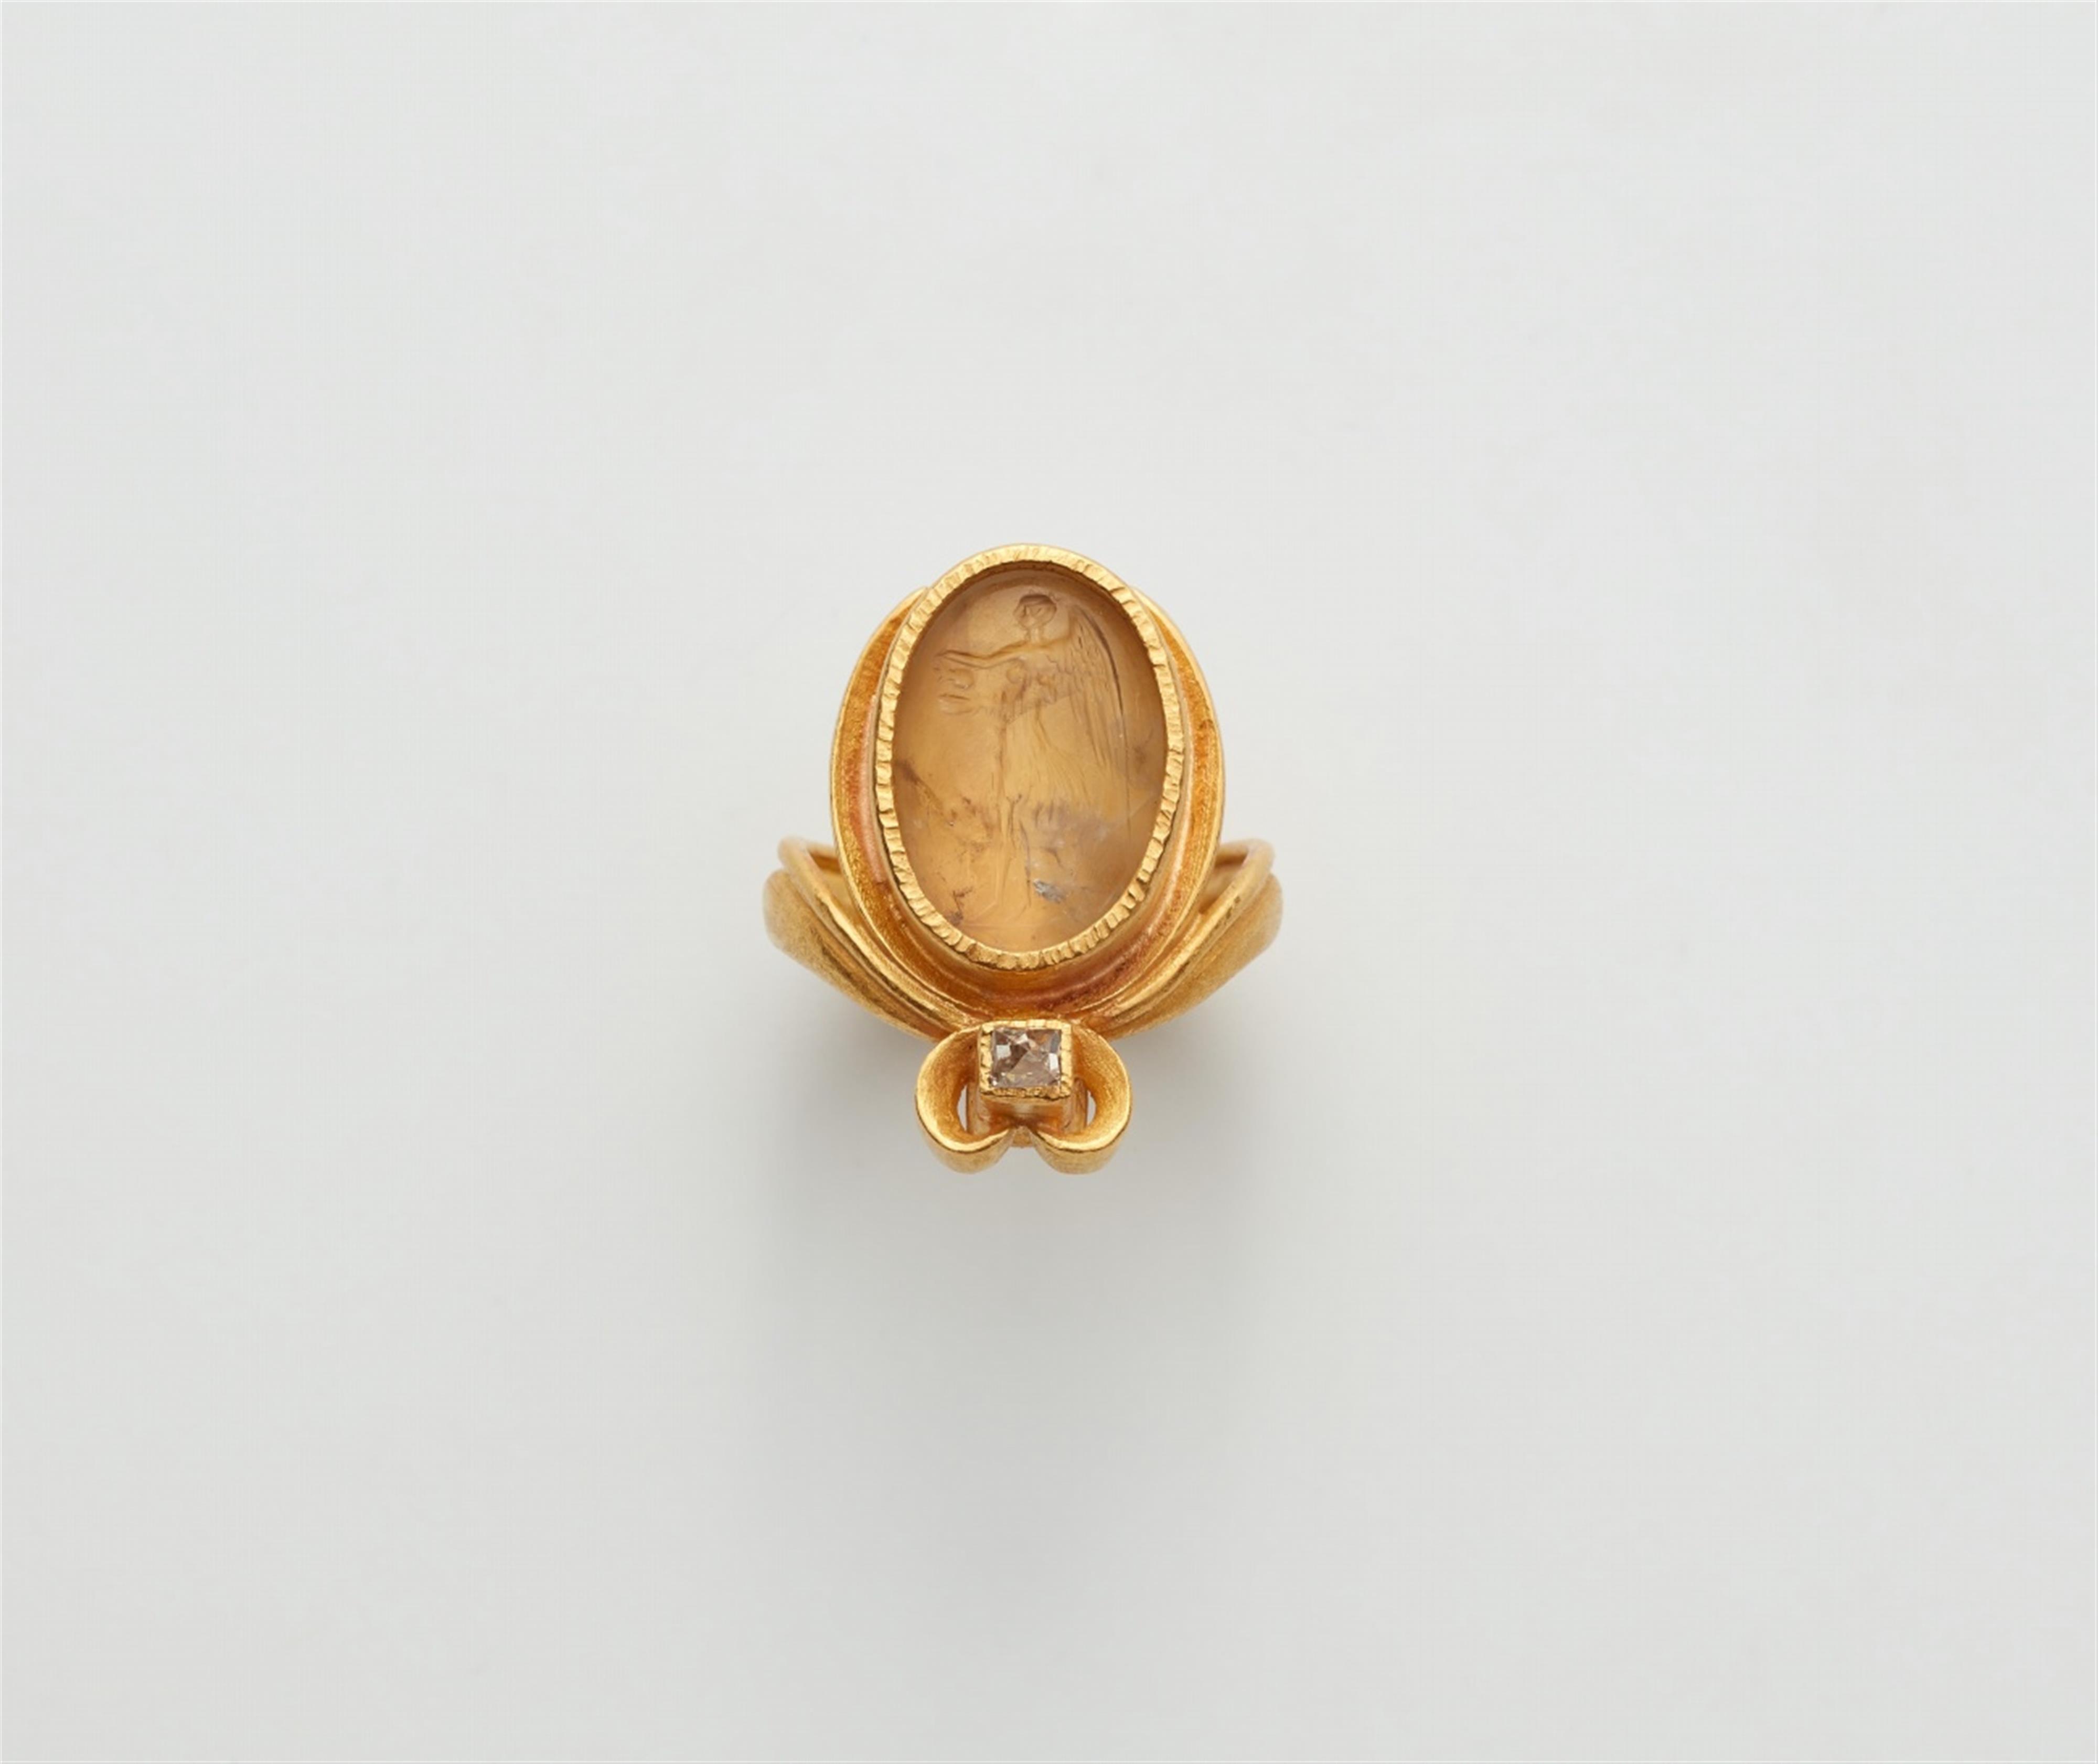 A 22k ring with a Roman intaglio - image-1